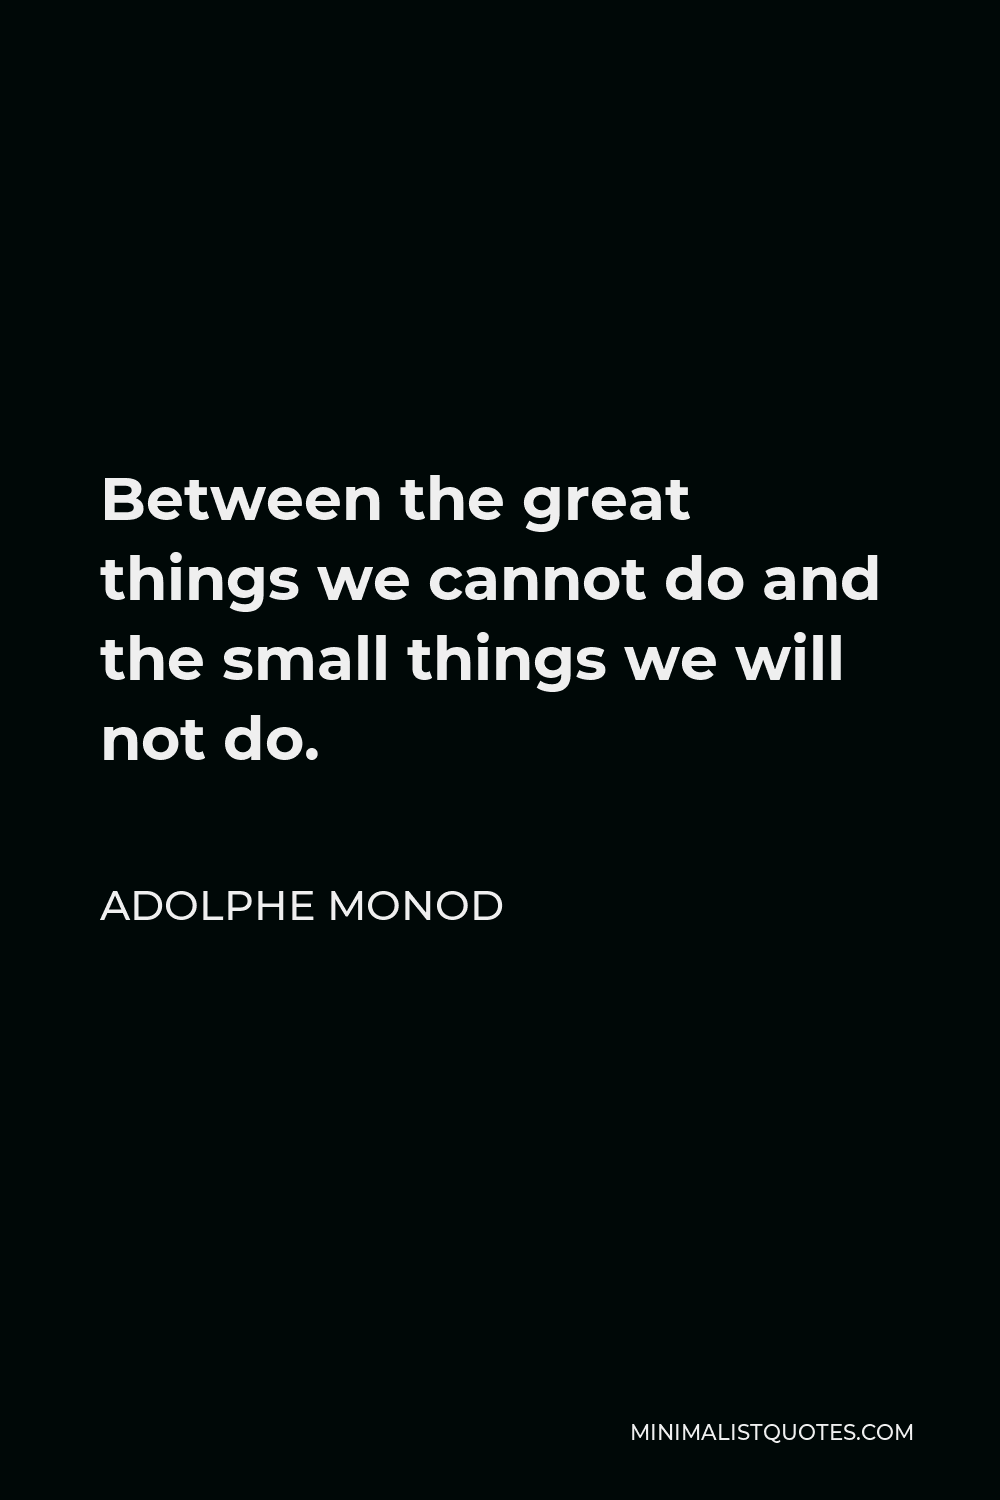 Adolphe Monod Quote - Between the great things we cannot do and the small things we will not do.